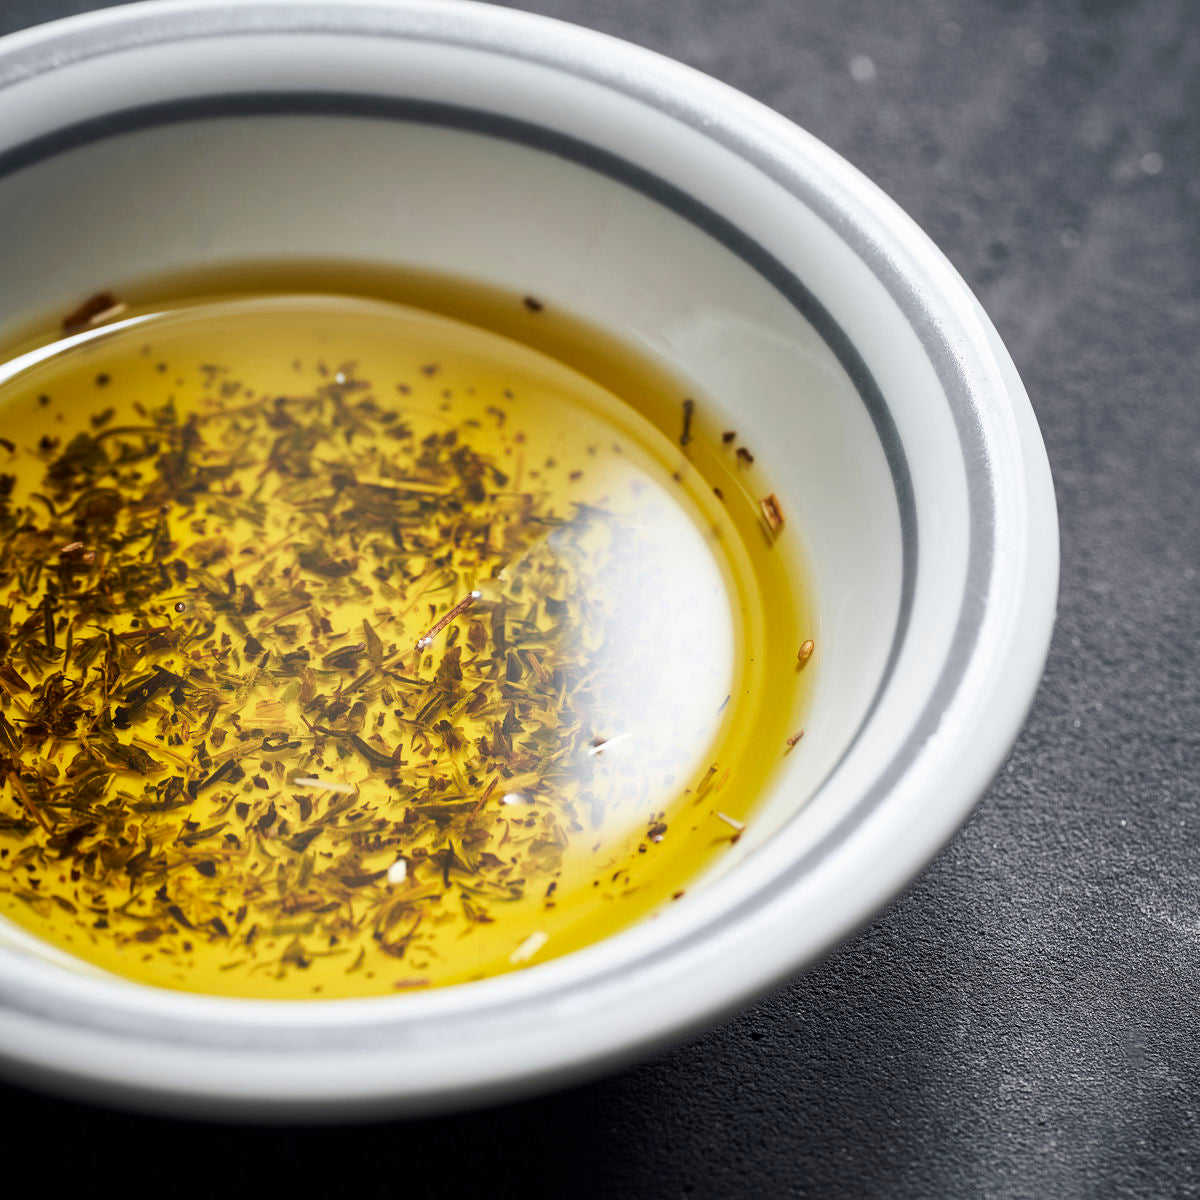 Olive oil with thyme Nicolas Vahe